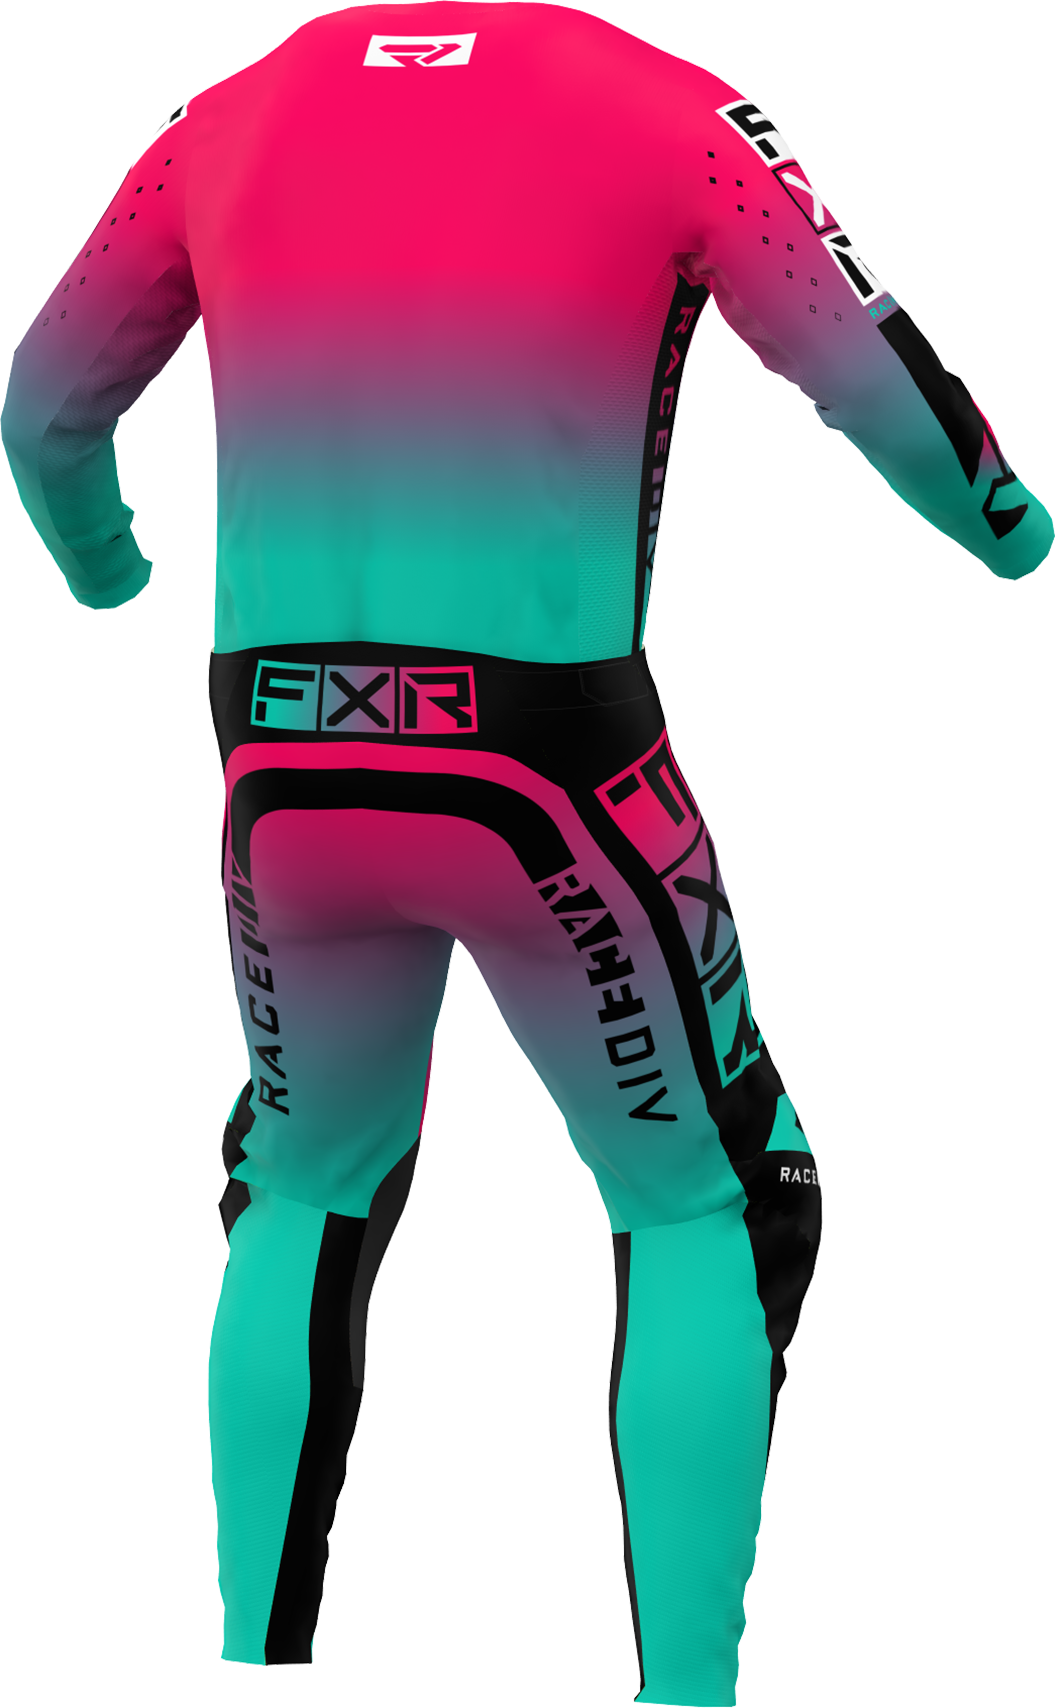 A 3D image of FXR's Podium Pro MX Jersey and Pant in Minty Re-Fresh/Coral colorway